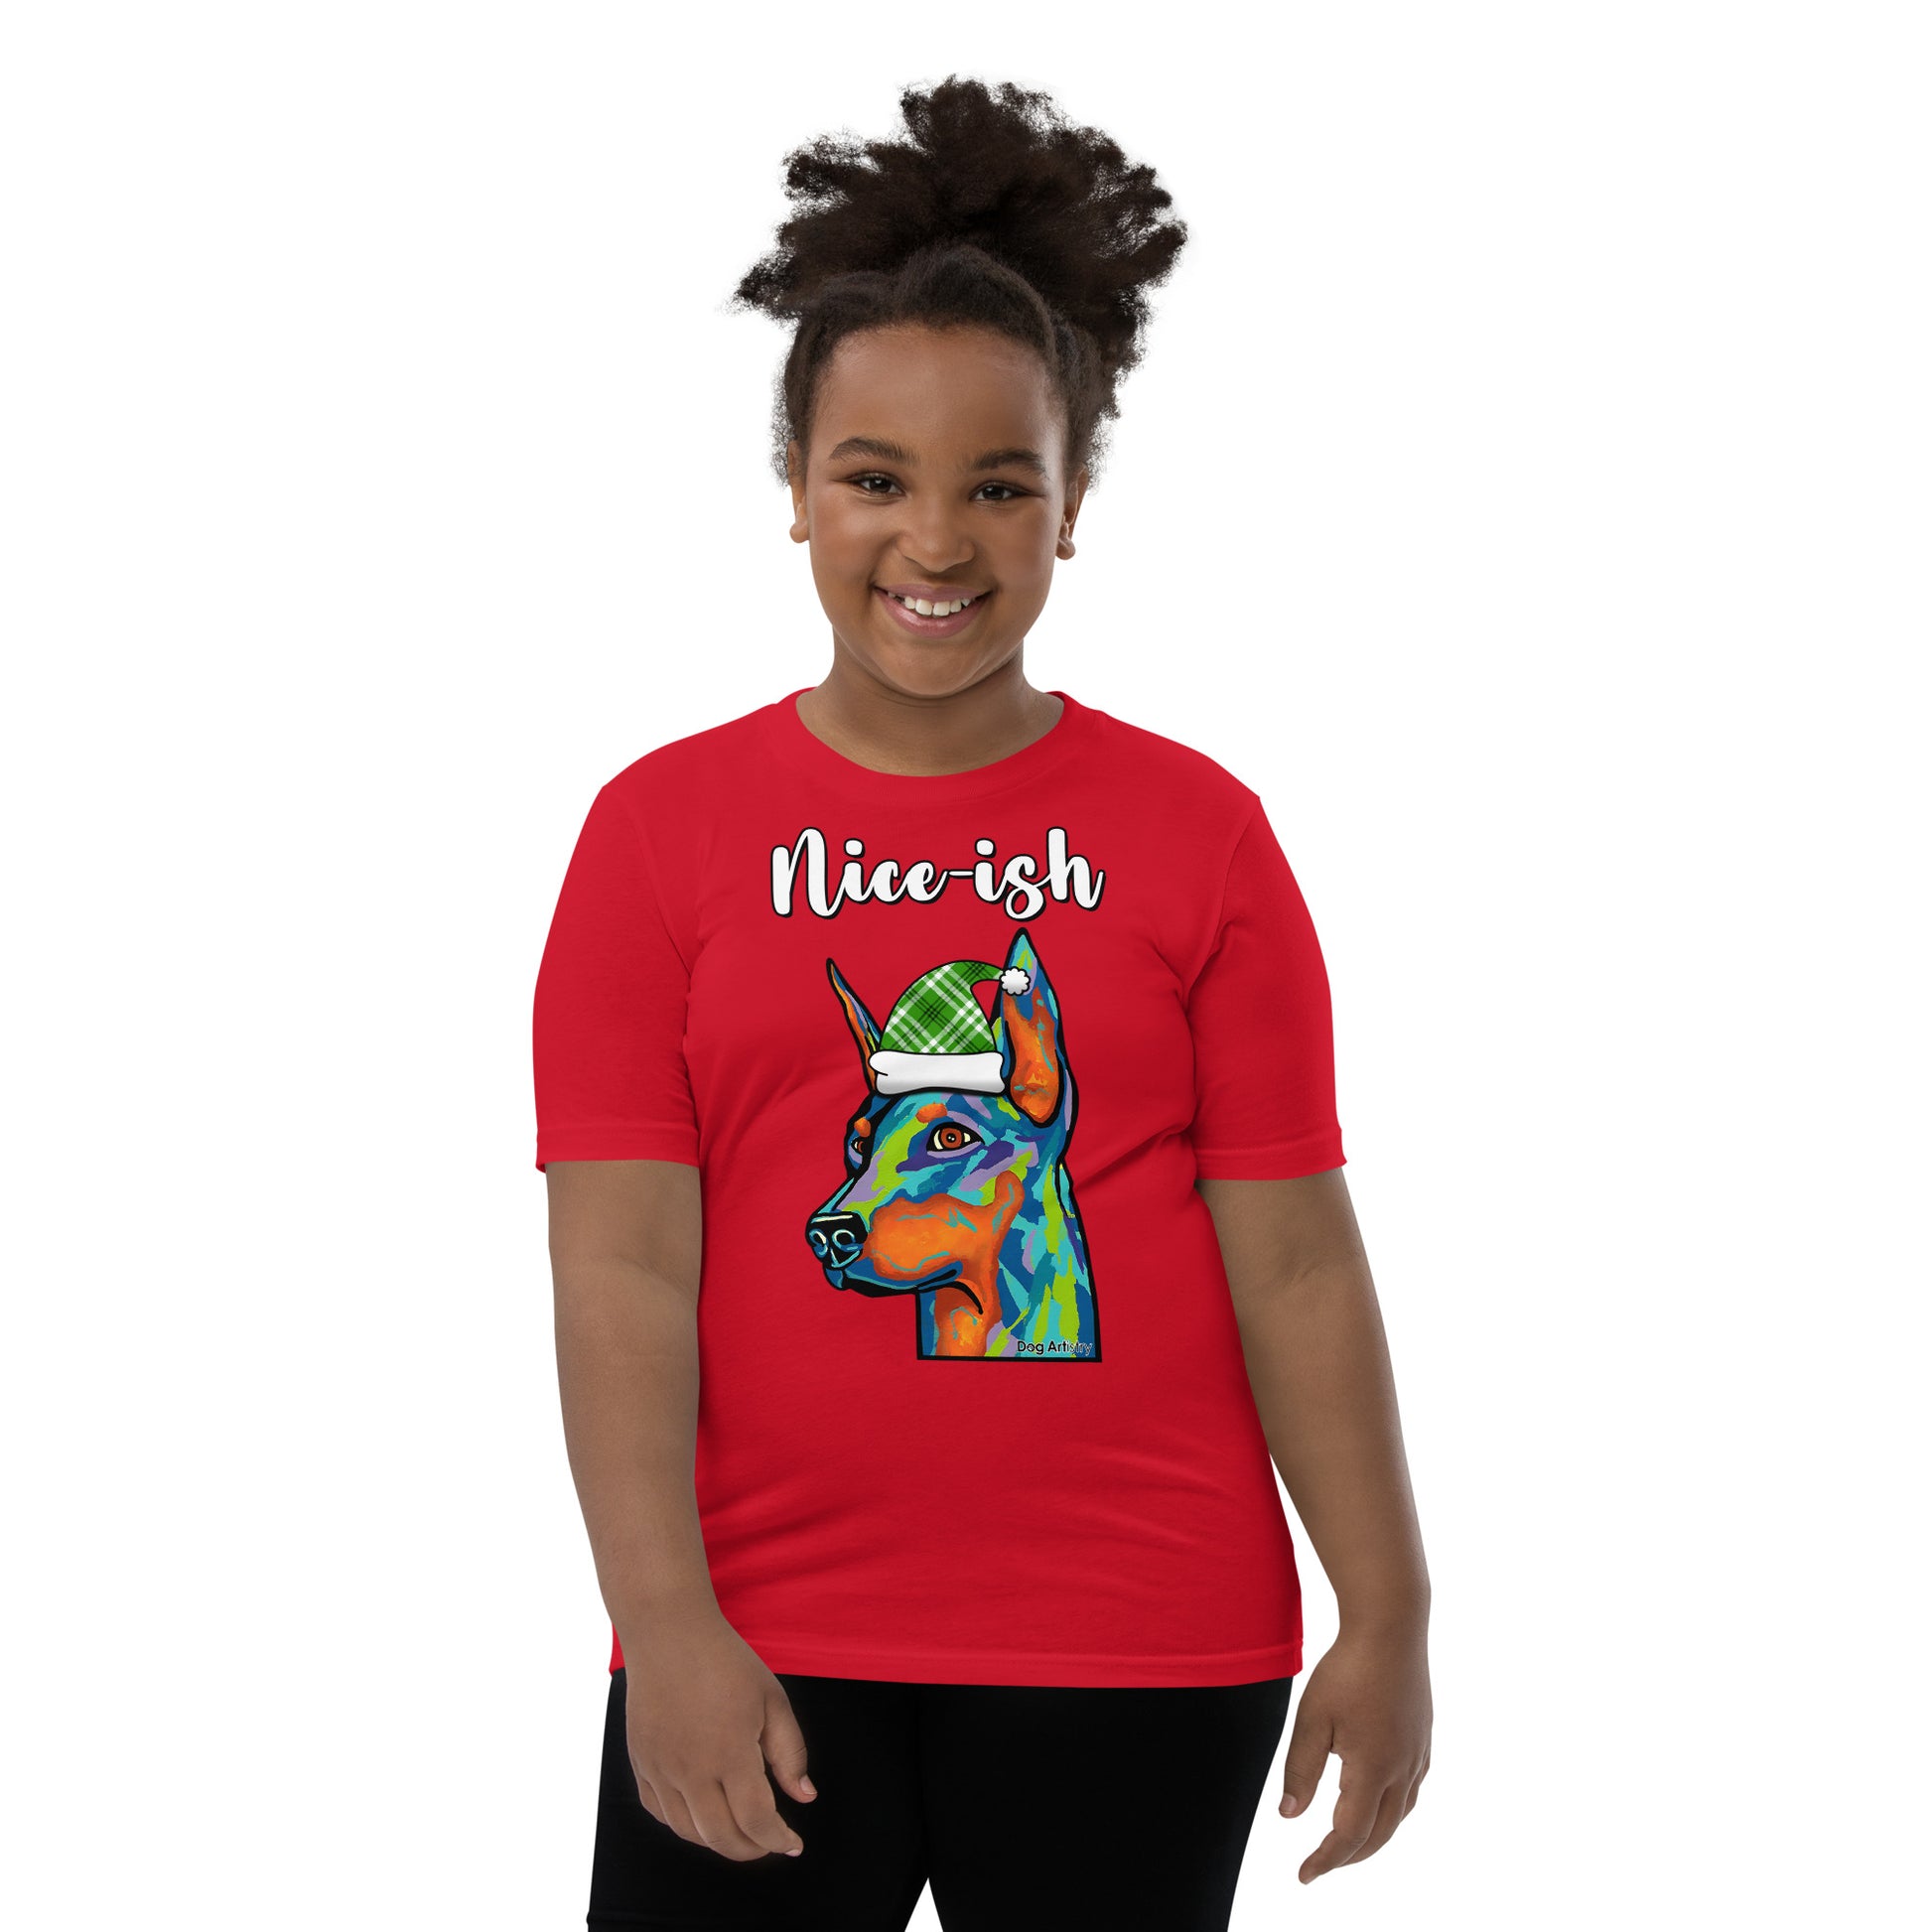 Nice-Ish Doberman Pinscher Holiday youth t-shirt red by Dog Artistry.